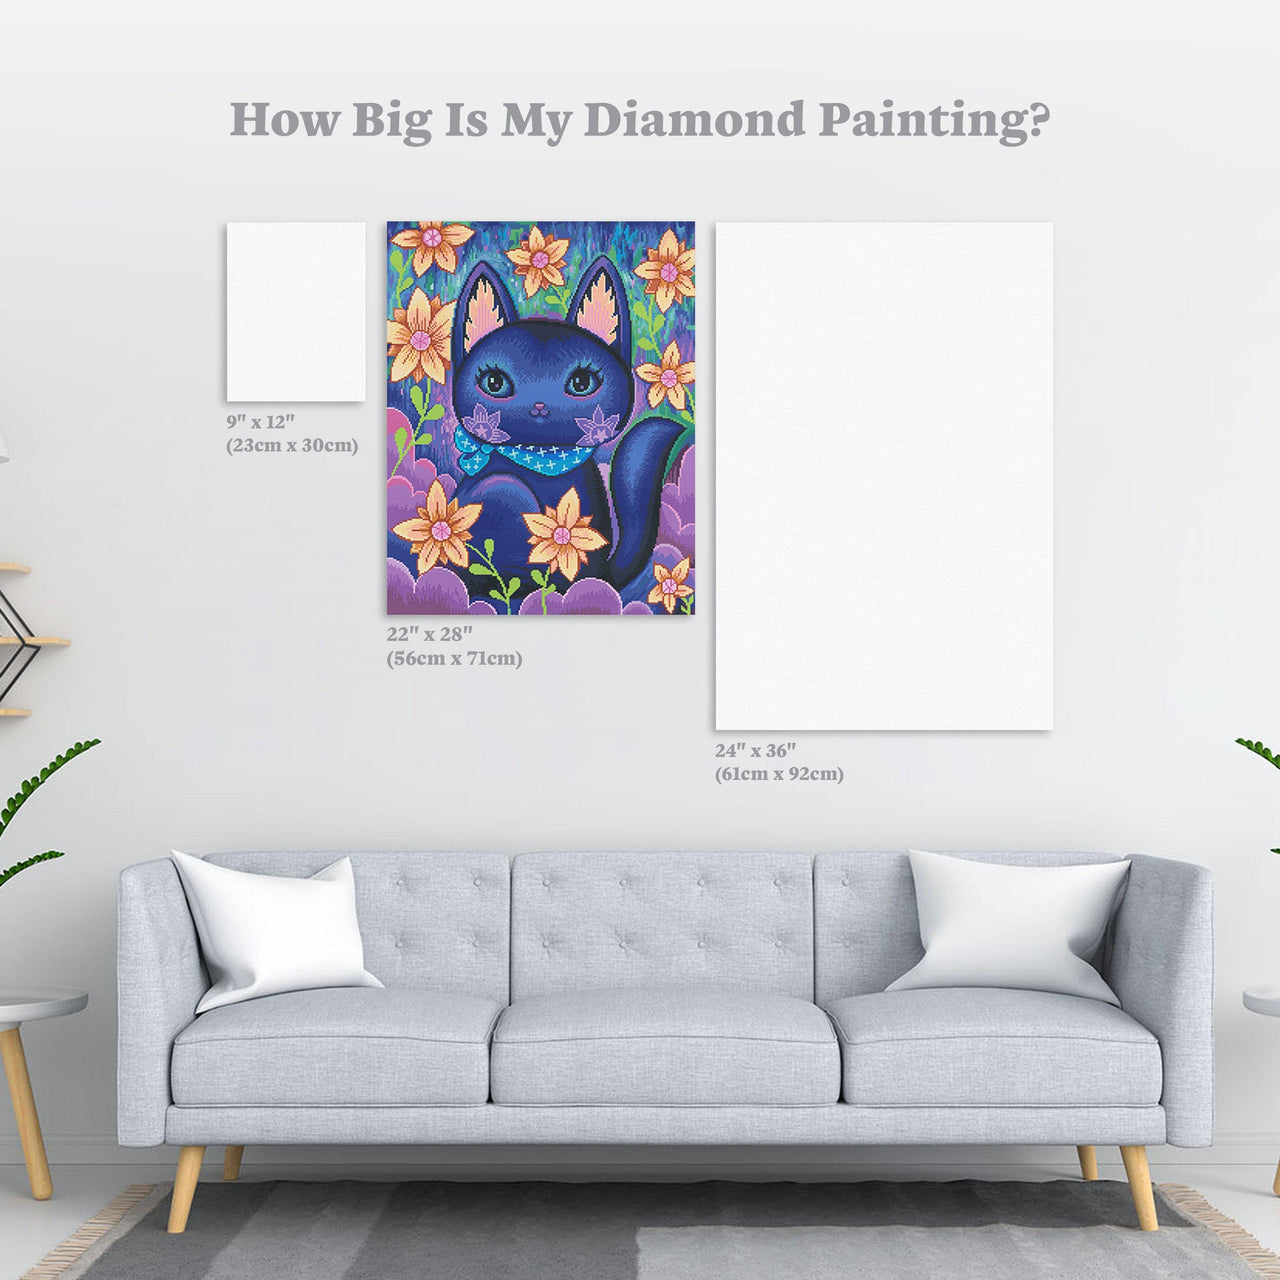 Diamond Painting Night Garden 22" x 28″ (56cm x 71cm) / Round with 34 Colors including 2 ABs / 50544